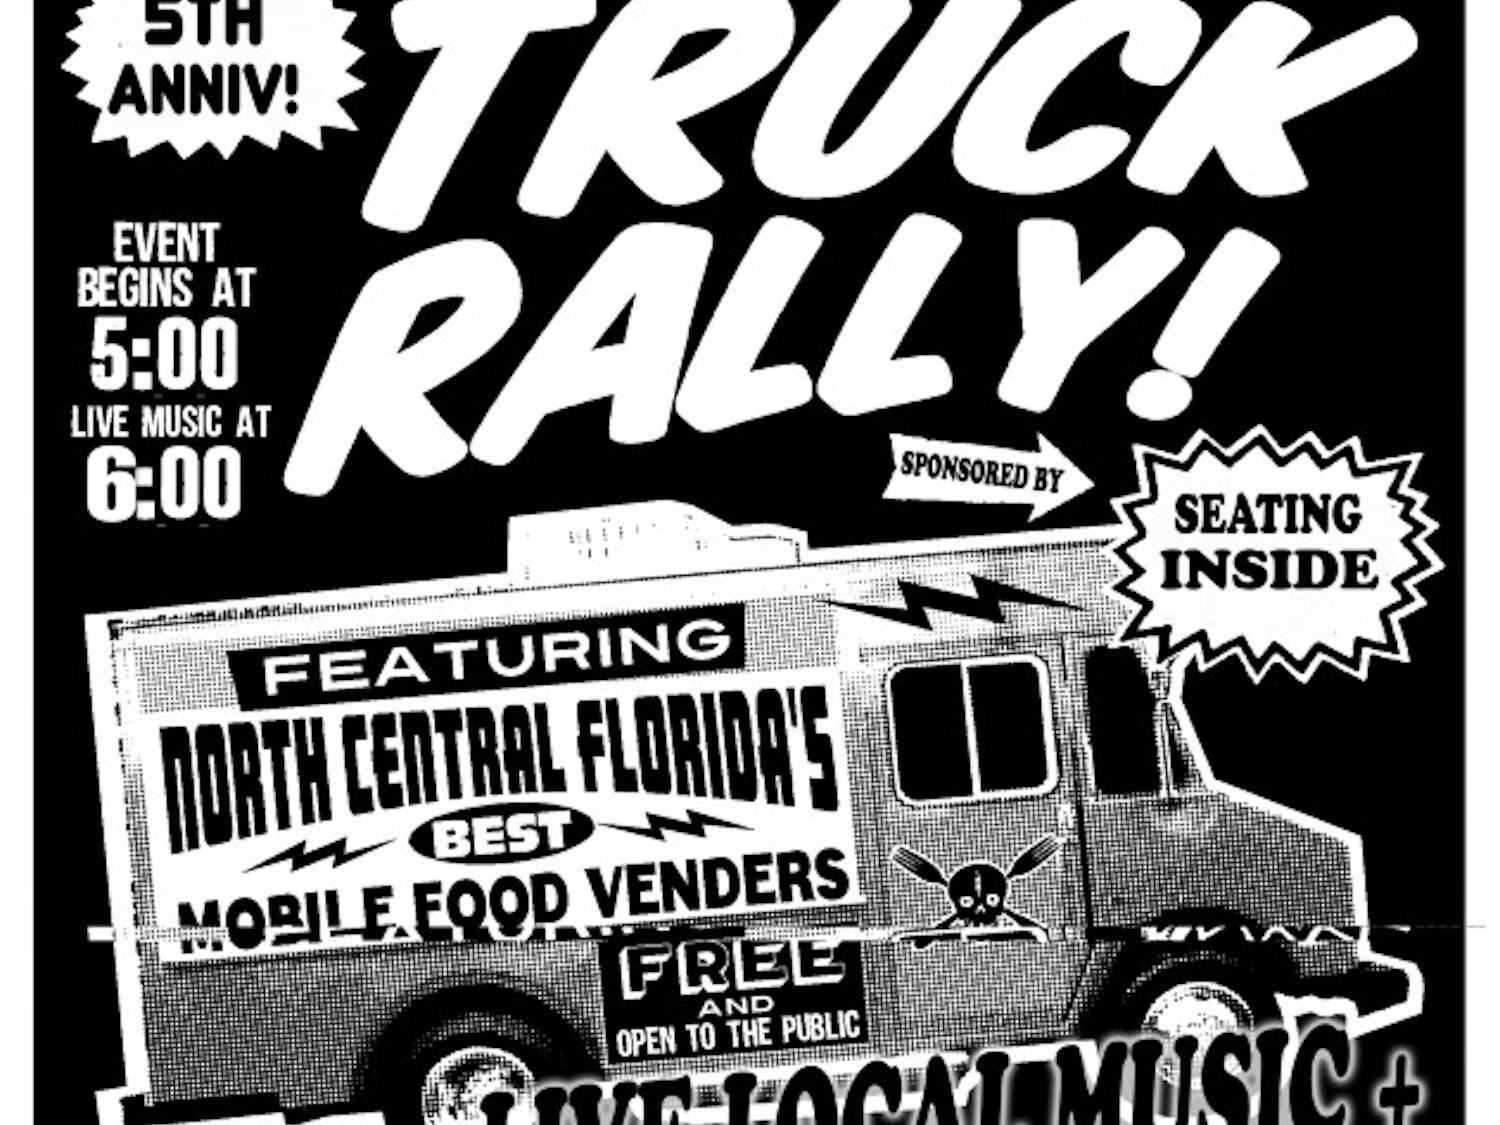 The Original Food Truck Rally will have 12 food truck vendors, free live local music from Glory Presents and, for the first time, Over Easy Creative will also host a silent disco in the beer garden with 200 headsets for $5 each.